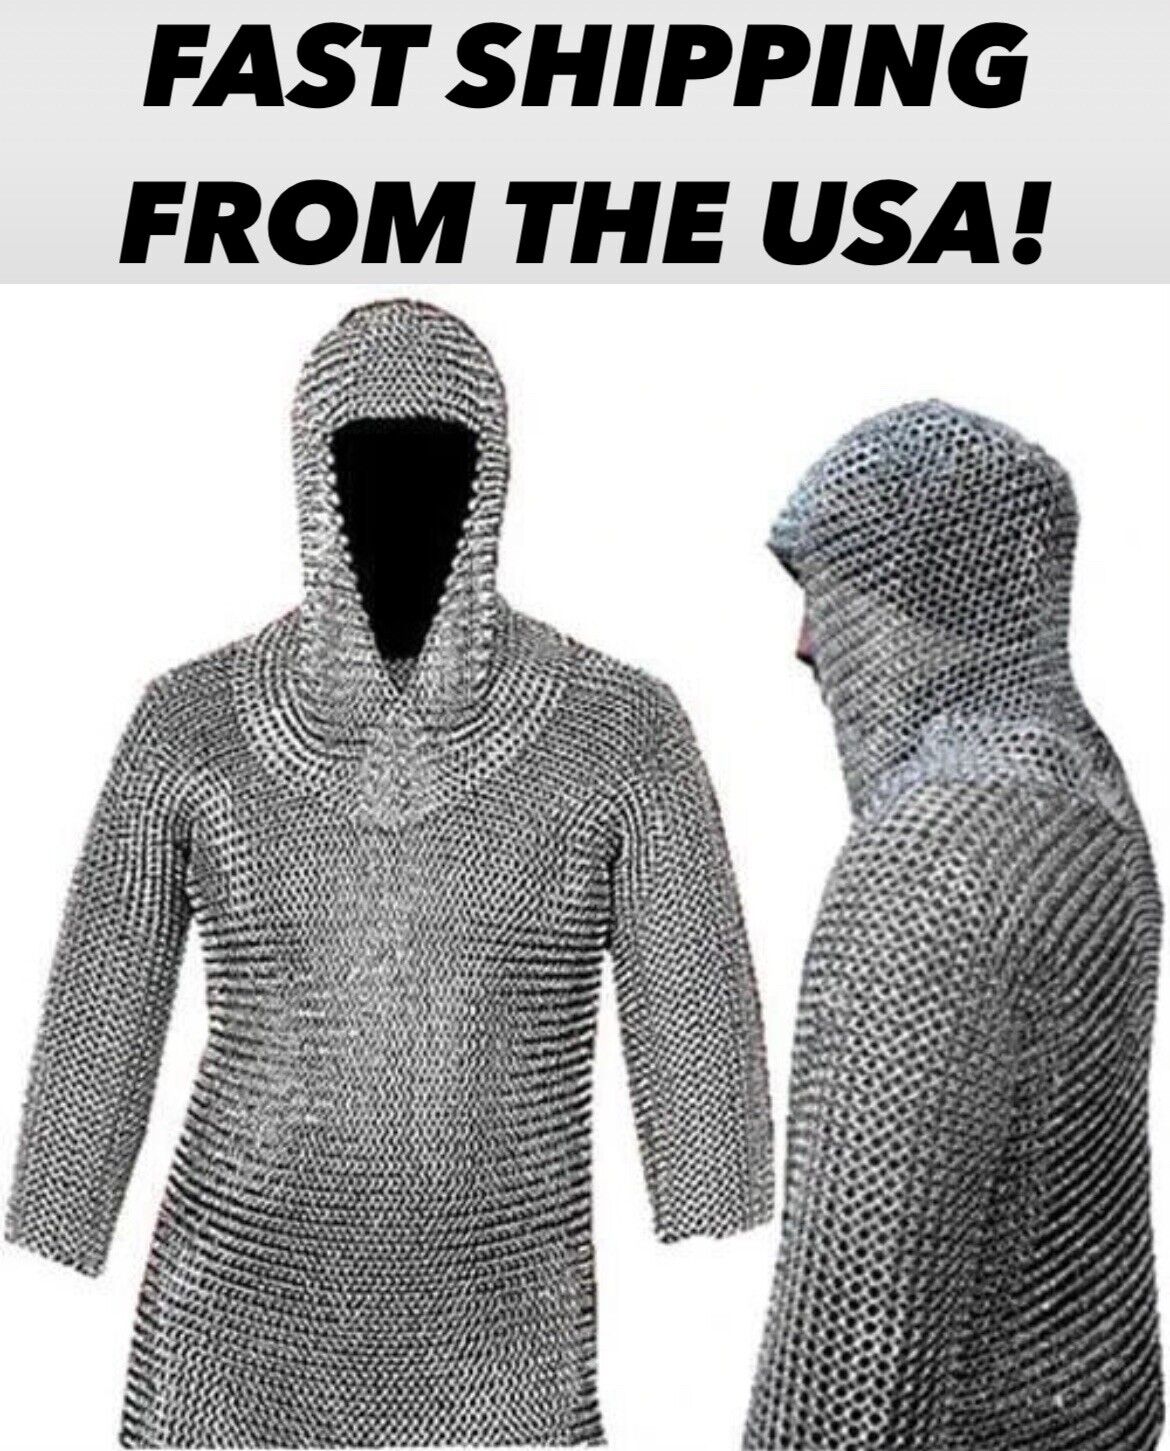 Medieval Warrior Chain Mail Shirt & Coif Armor Set And Shirt X-LARGE FAST SHIP